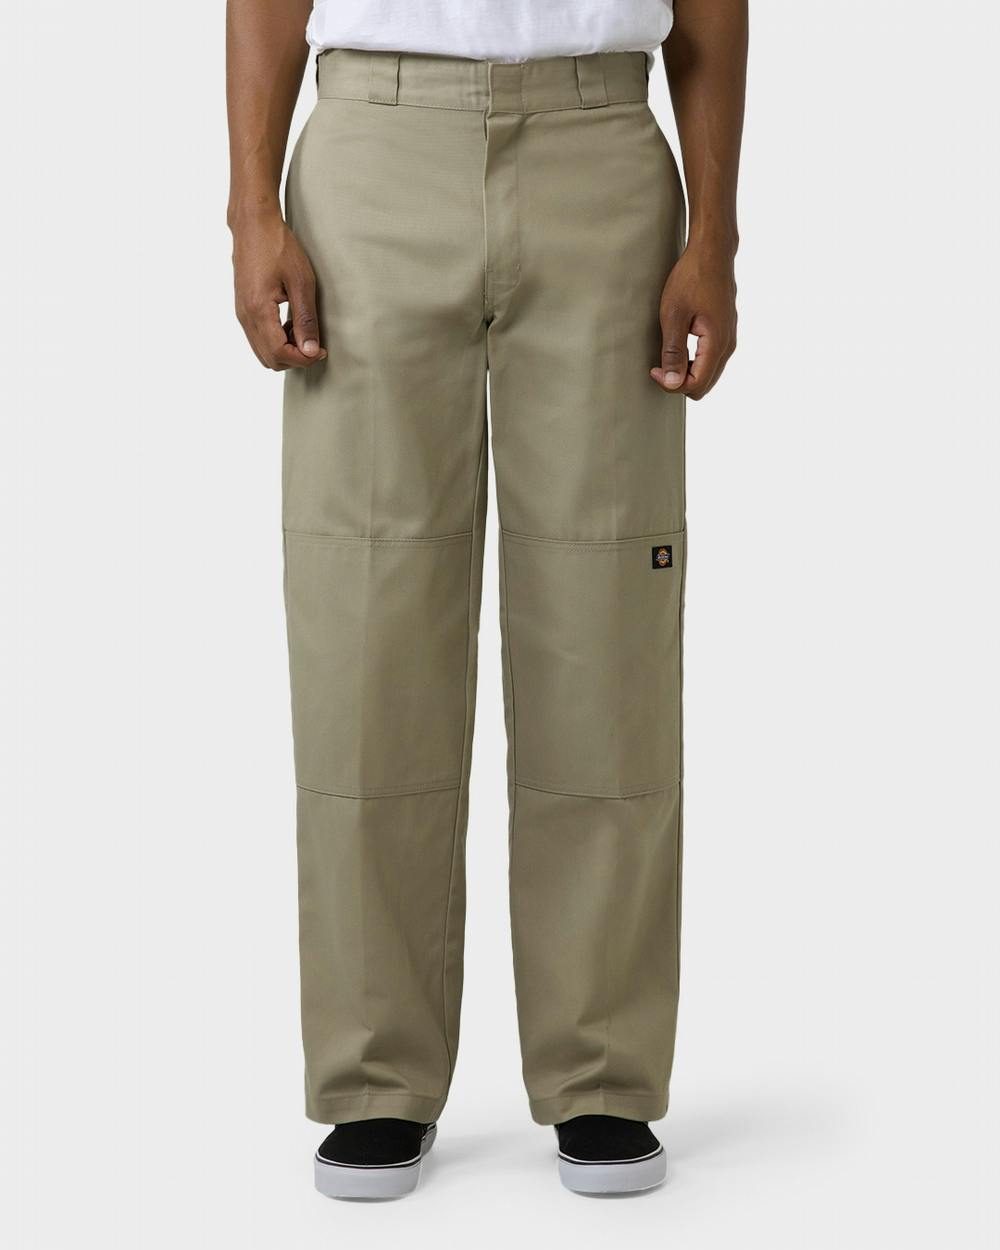 Double Knee Loose Fit Work Pant